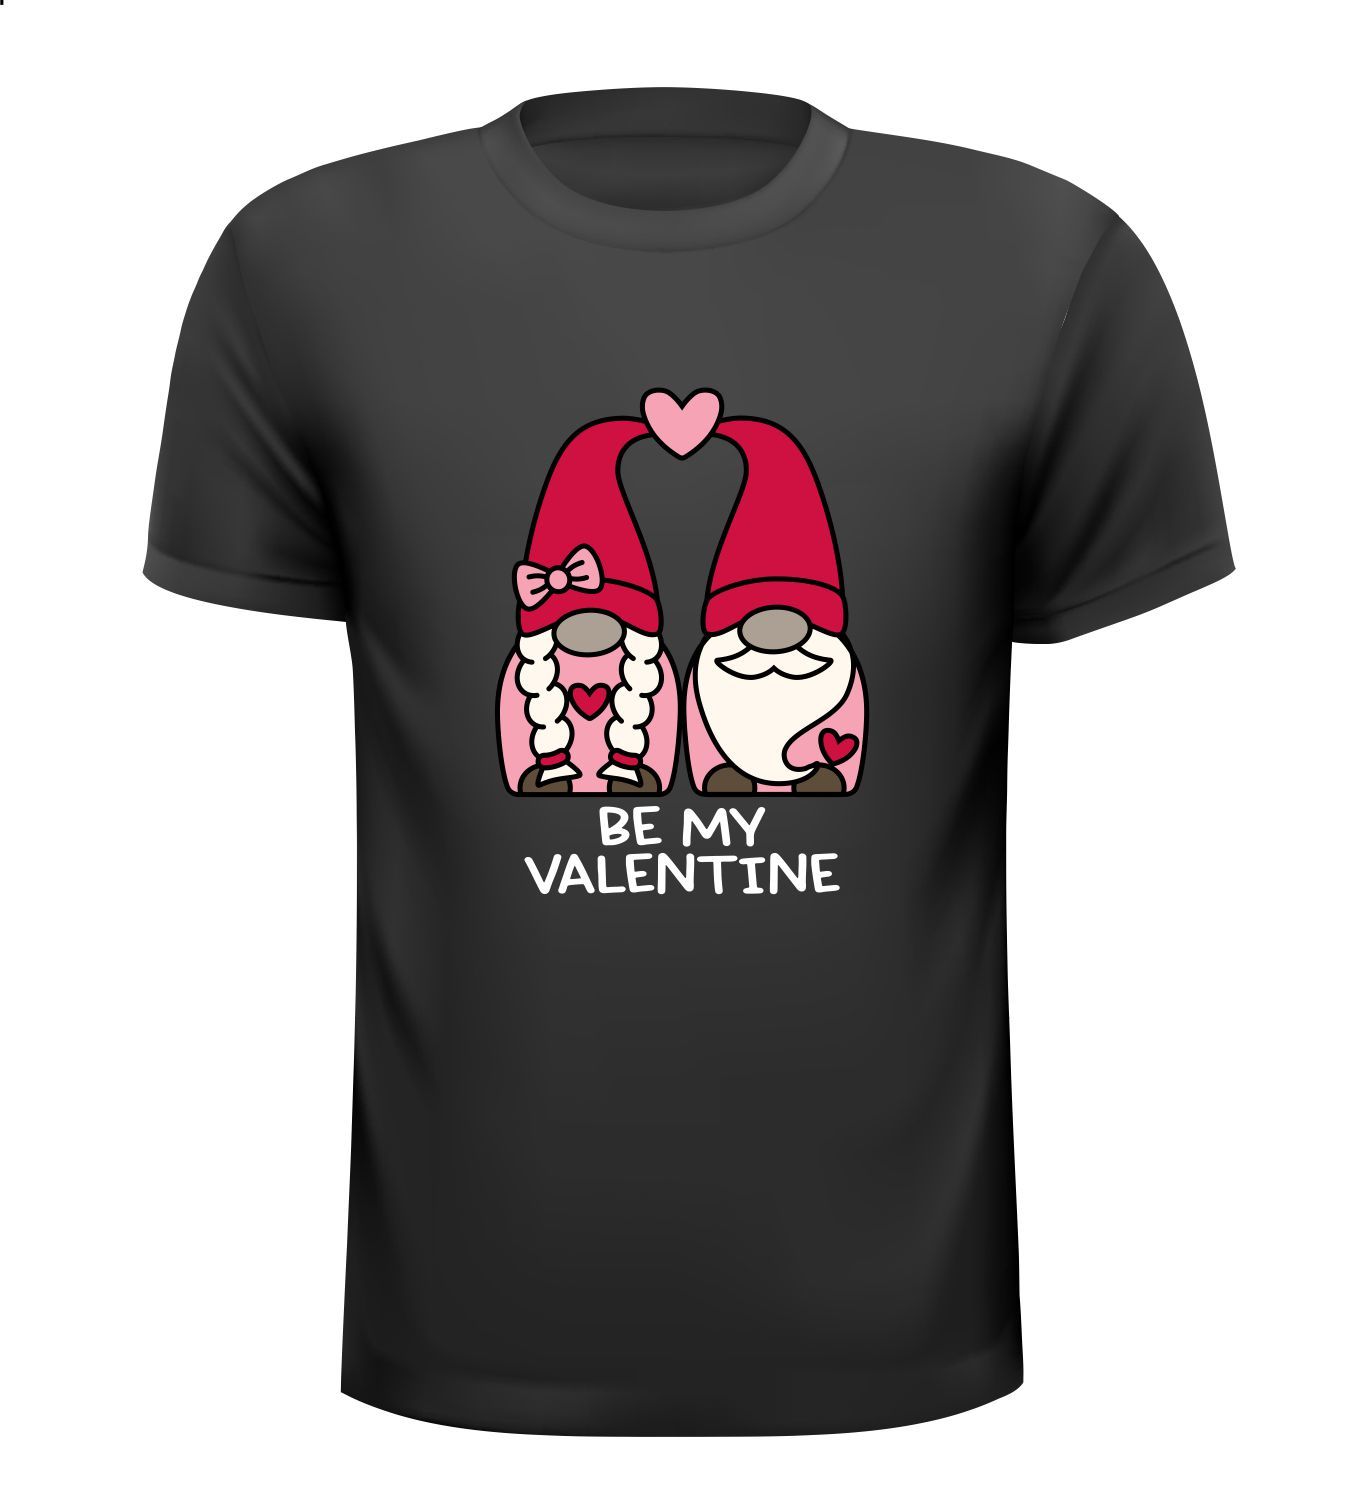 T-shirt be my Valentine kabouter opdruk